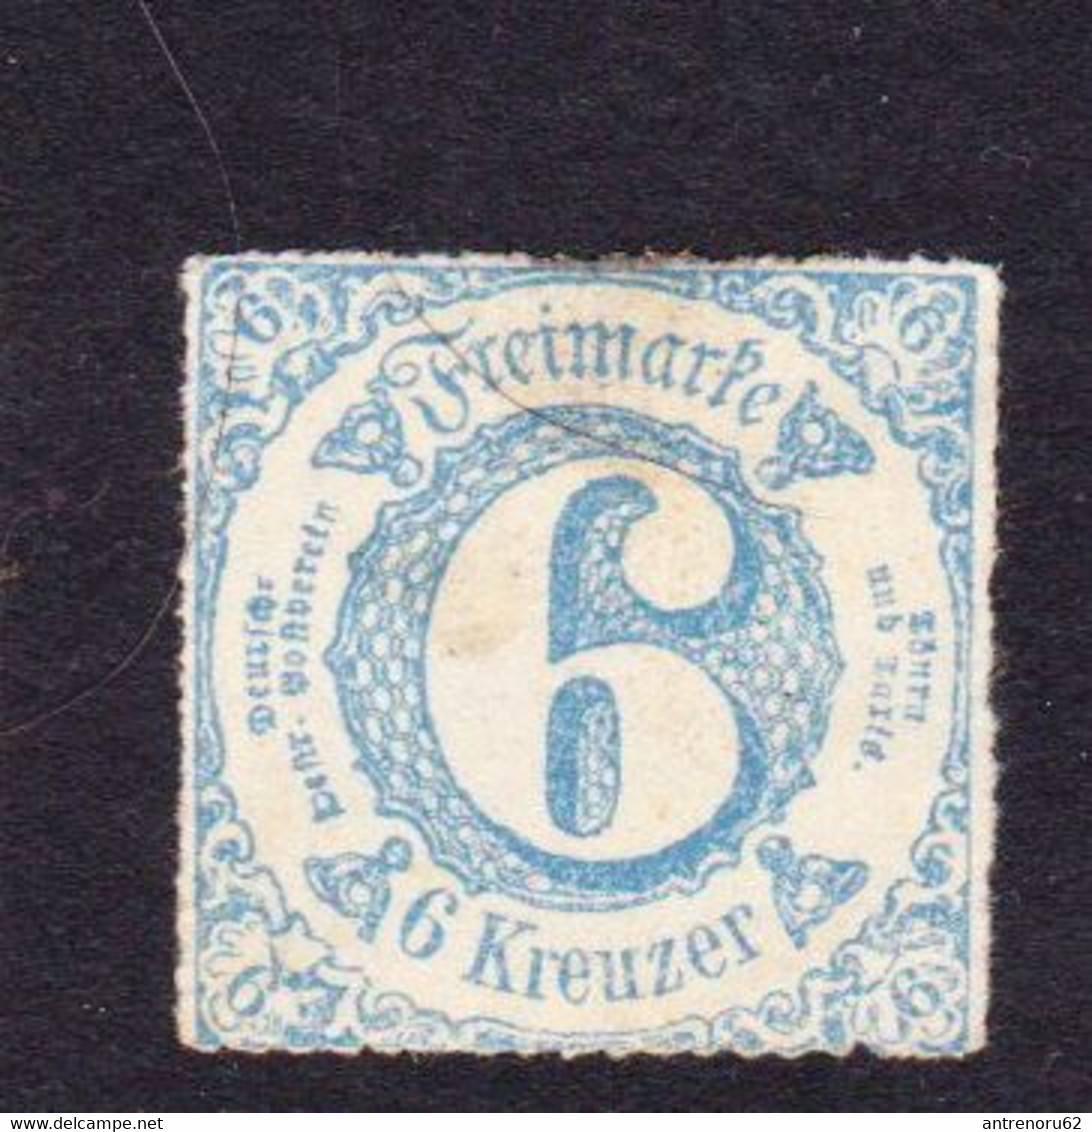 STAMPS-THURN-AND-TAXIS-1865-UNUSED-MH*-SEE-SCAN - Mint